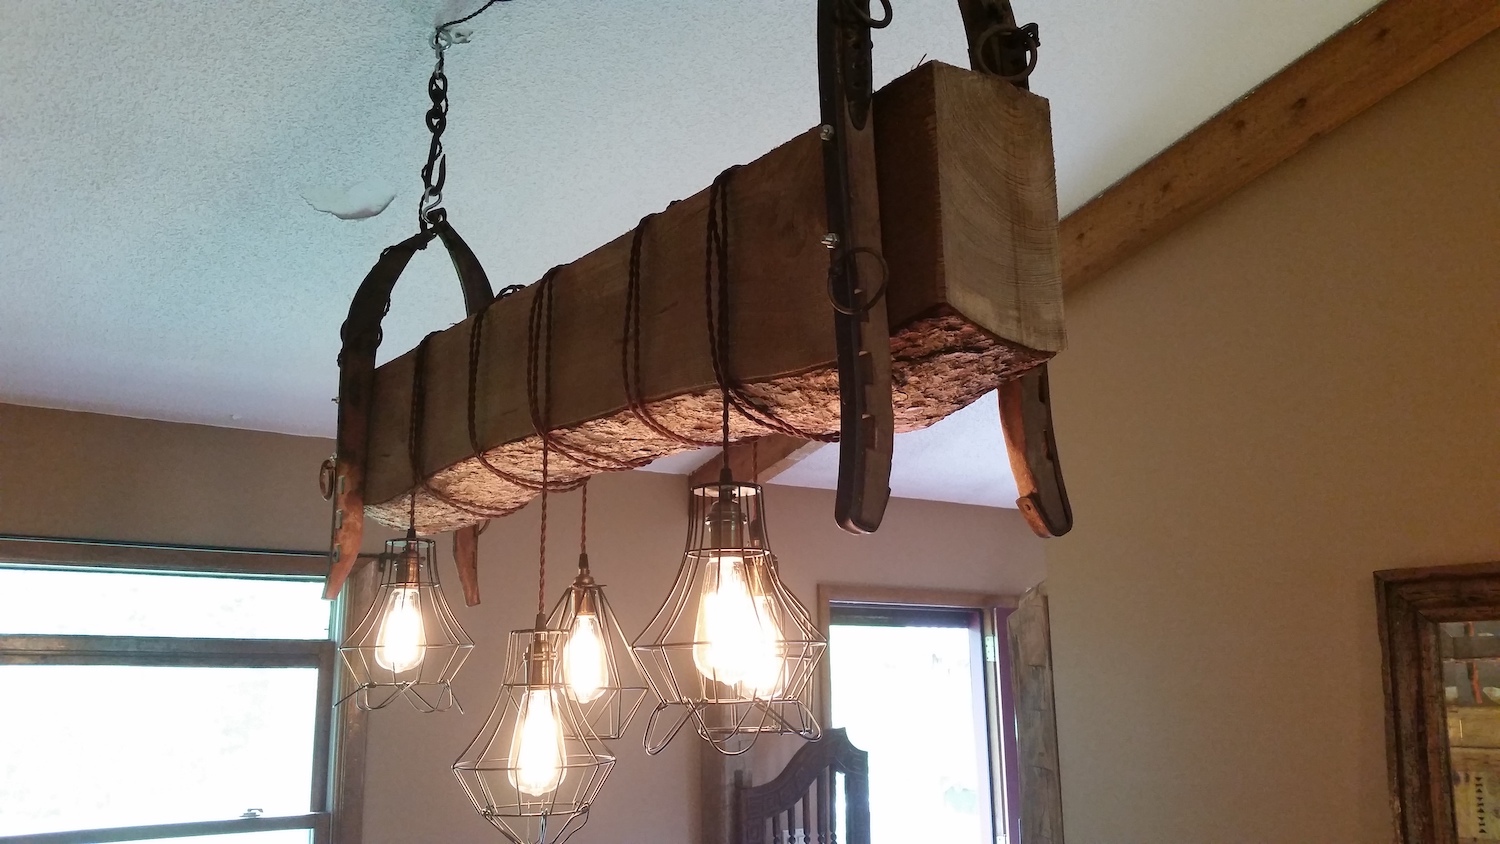 Another angle of the barn beam light made by a customer